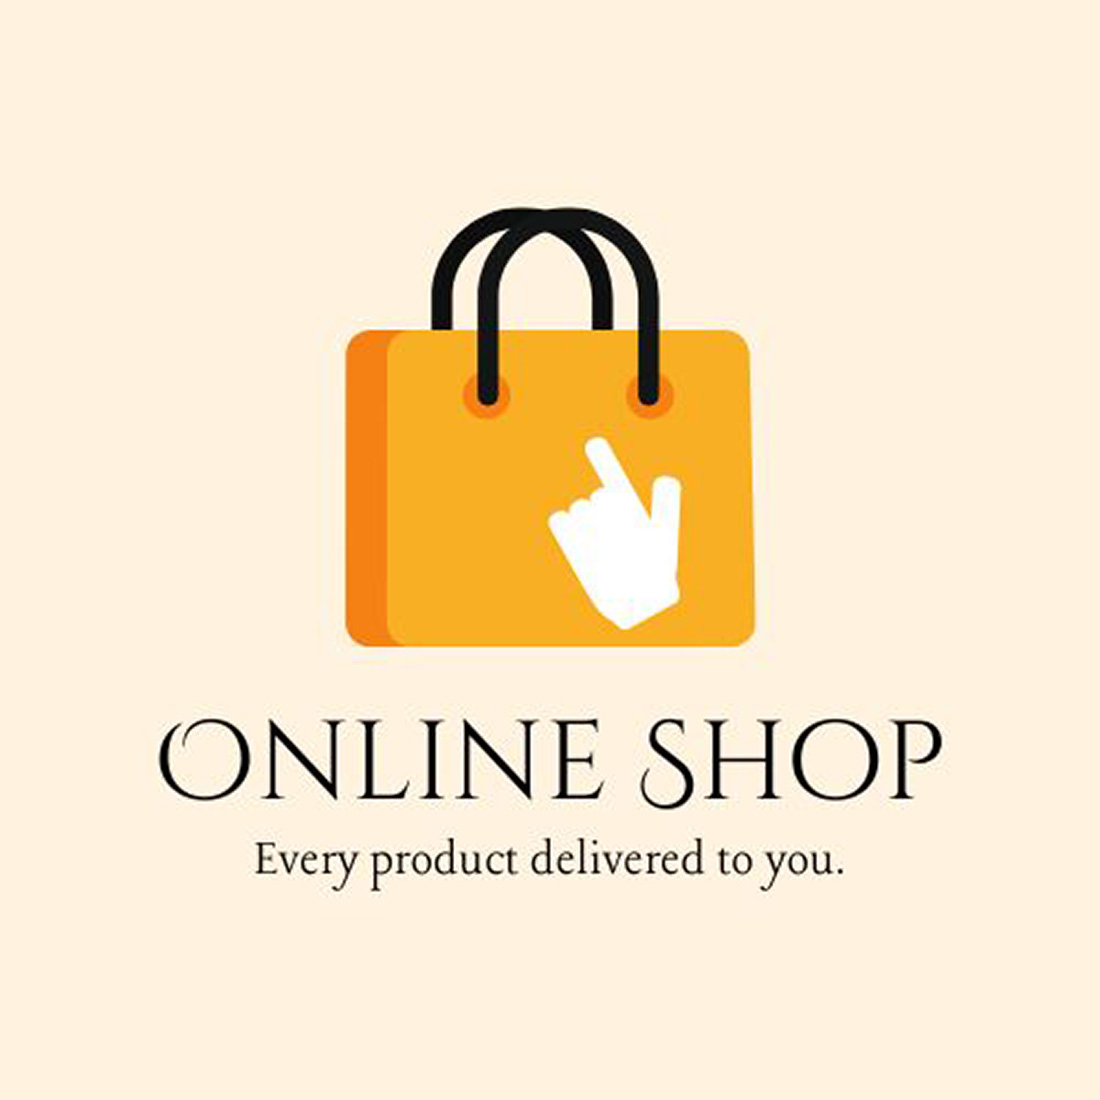 5 Best eCommerce Store Logo cover image.